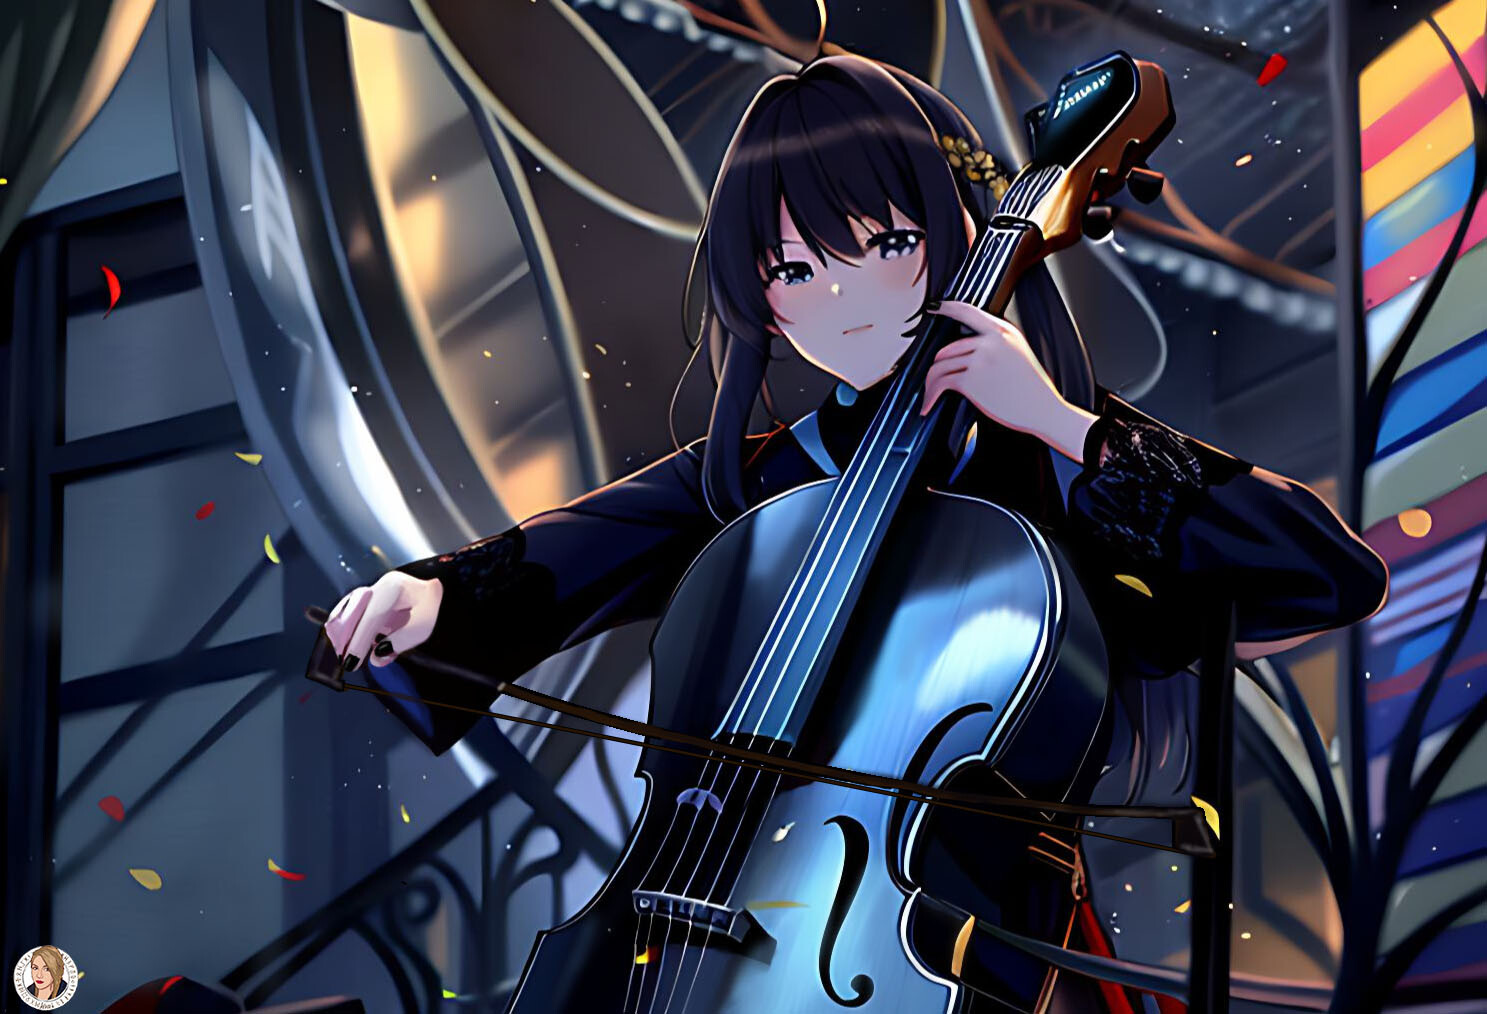 Cello - Musical Instrument | page 7 of 14 - Zerochan Anime Image Board  Mobile